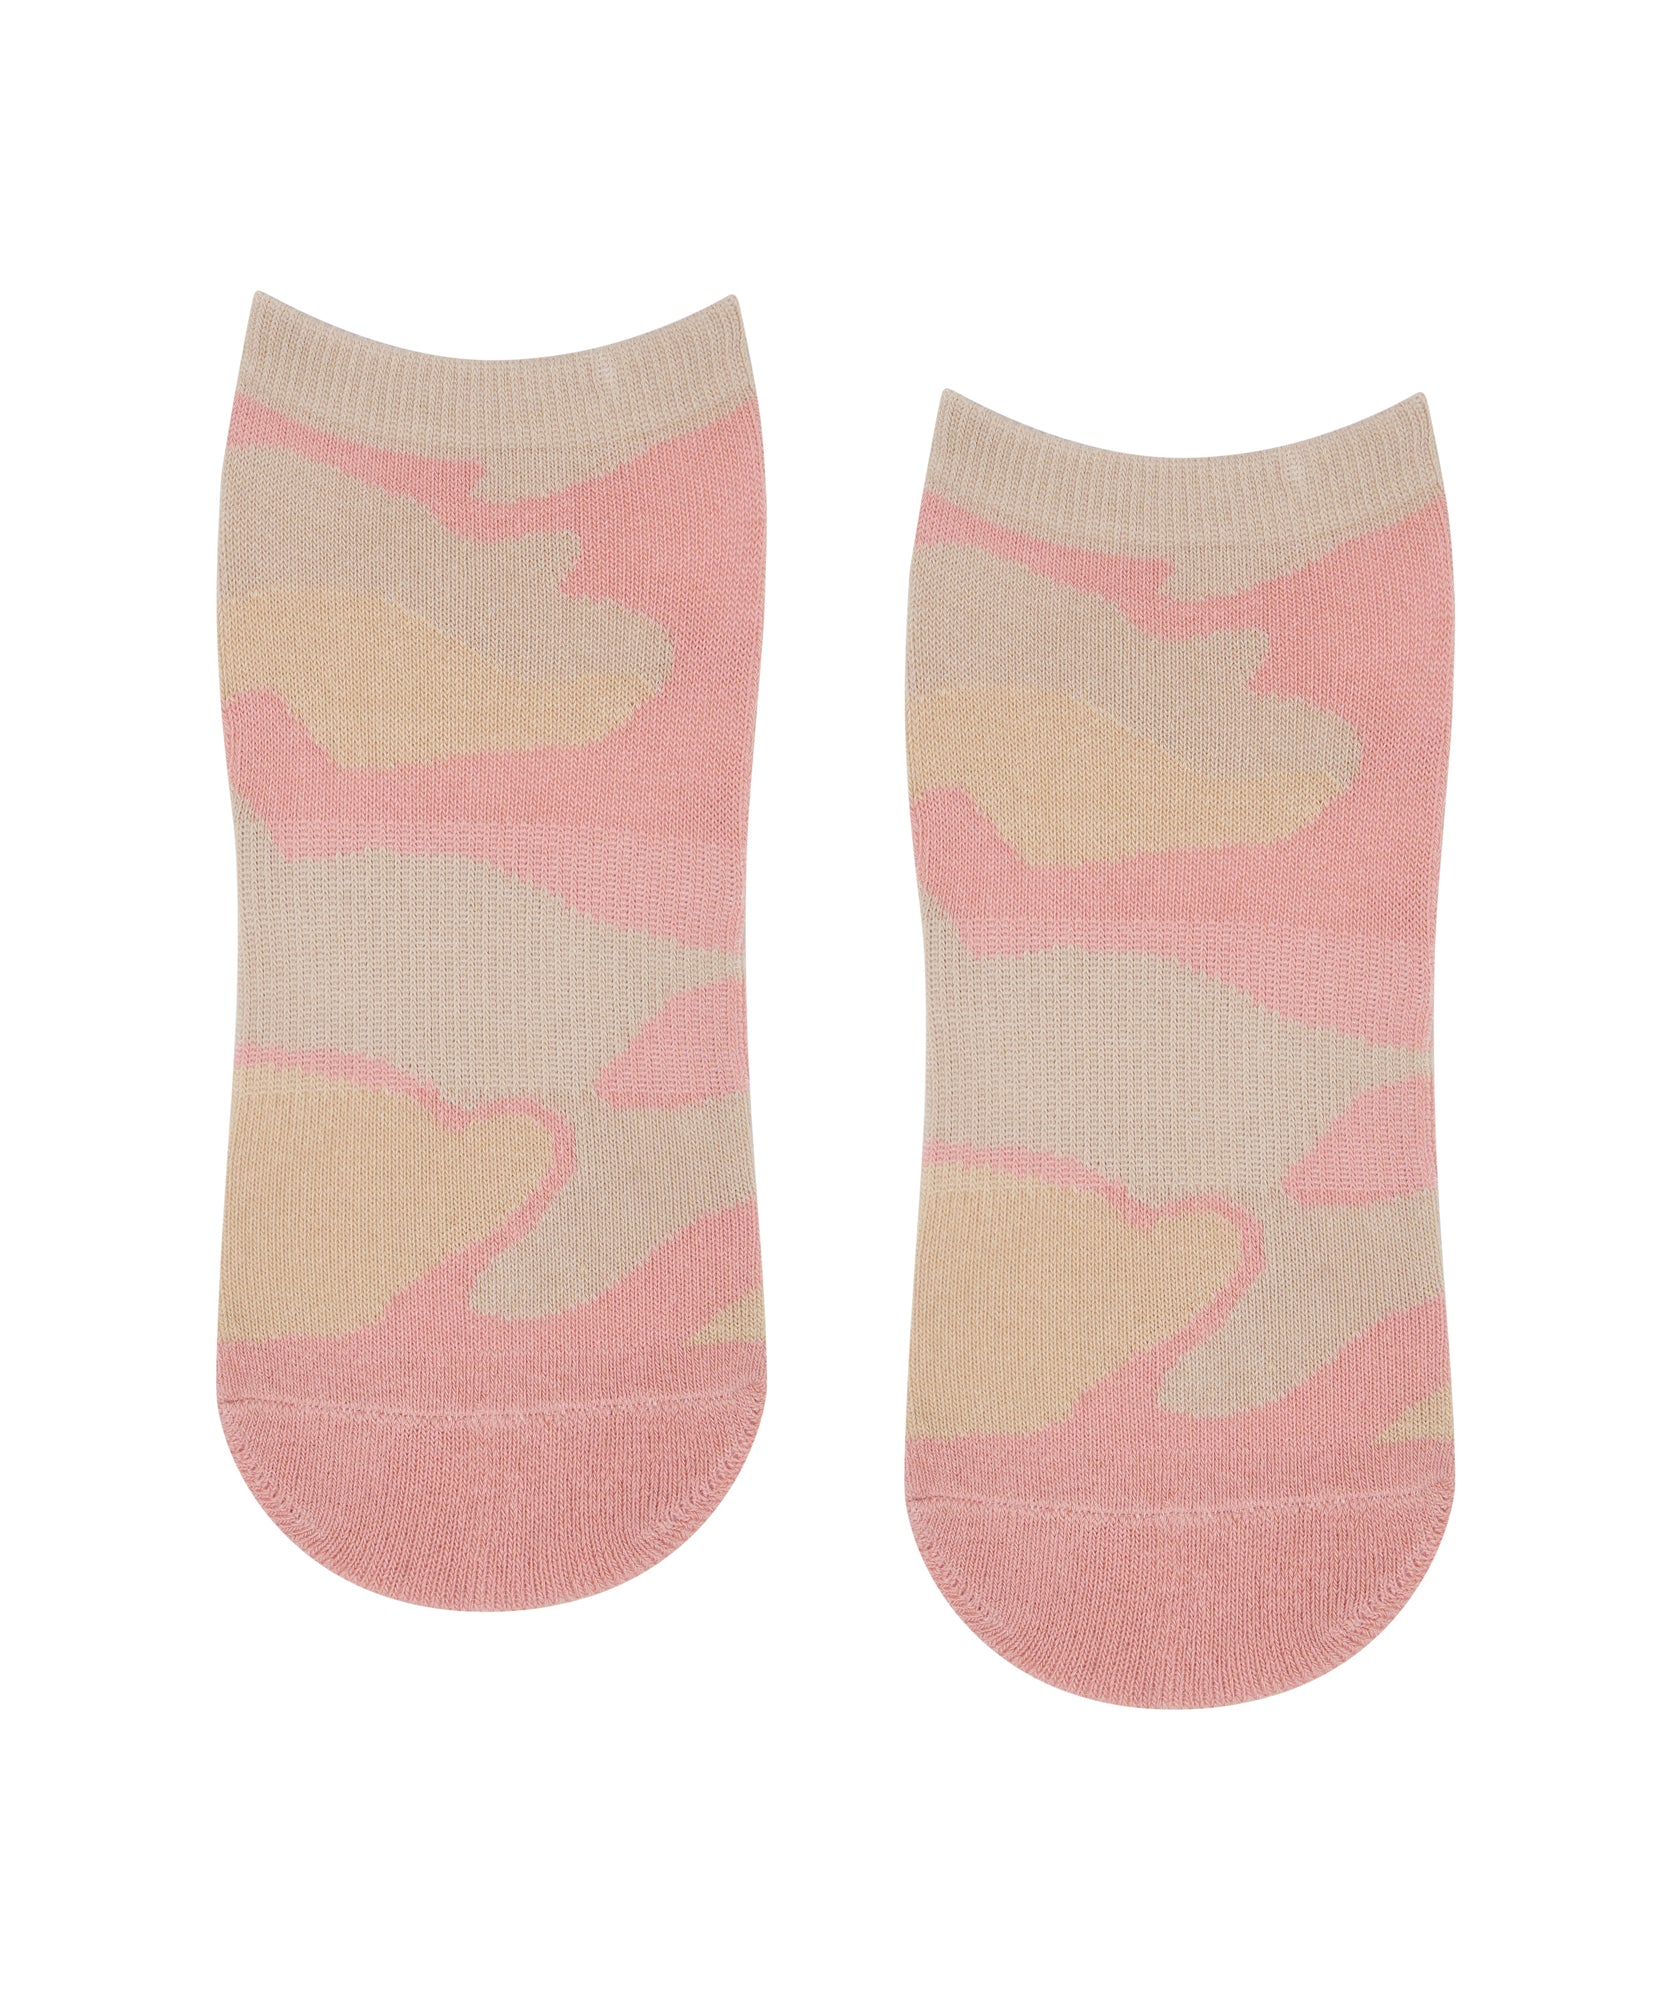 GIOCA Grip Socks Mid Cushioned Sole Optimum Stability Pad Non Slipping Pink  - M